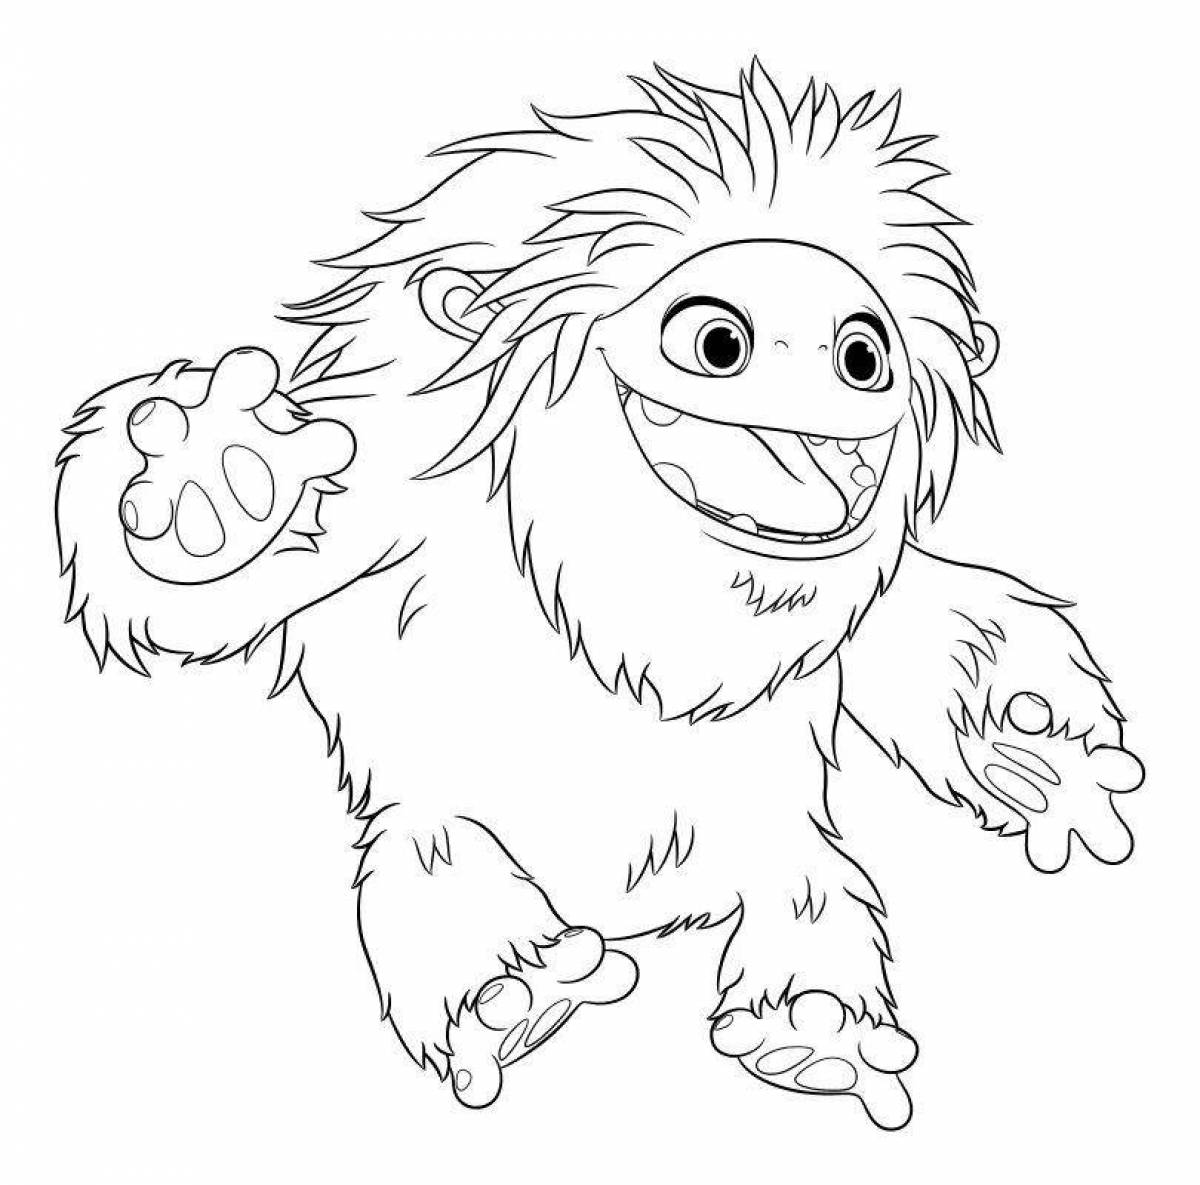 Coloring page graceful big foot